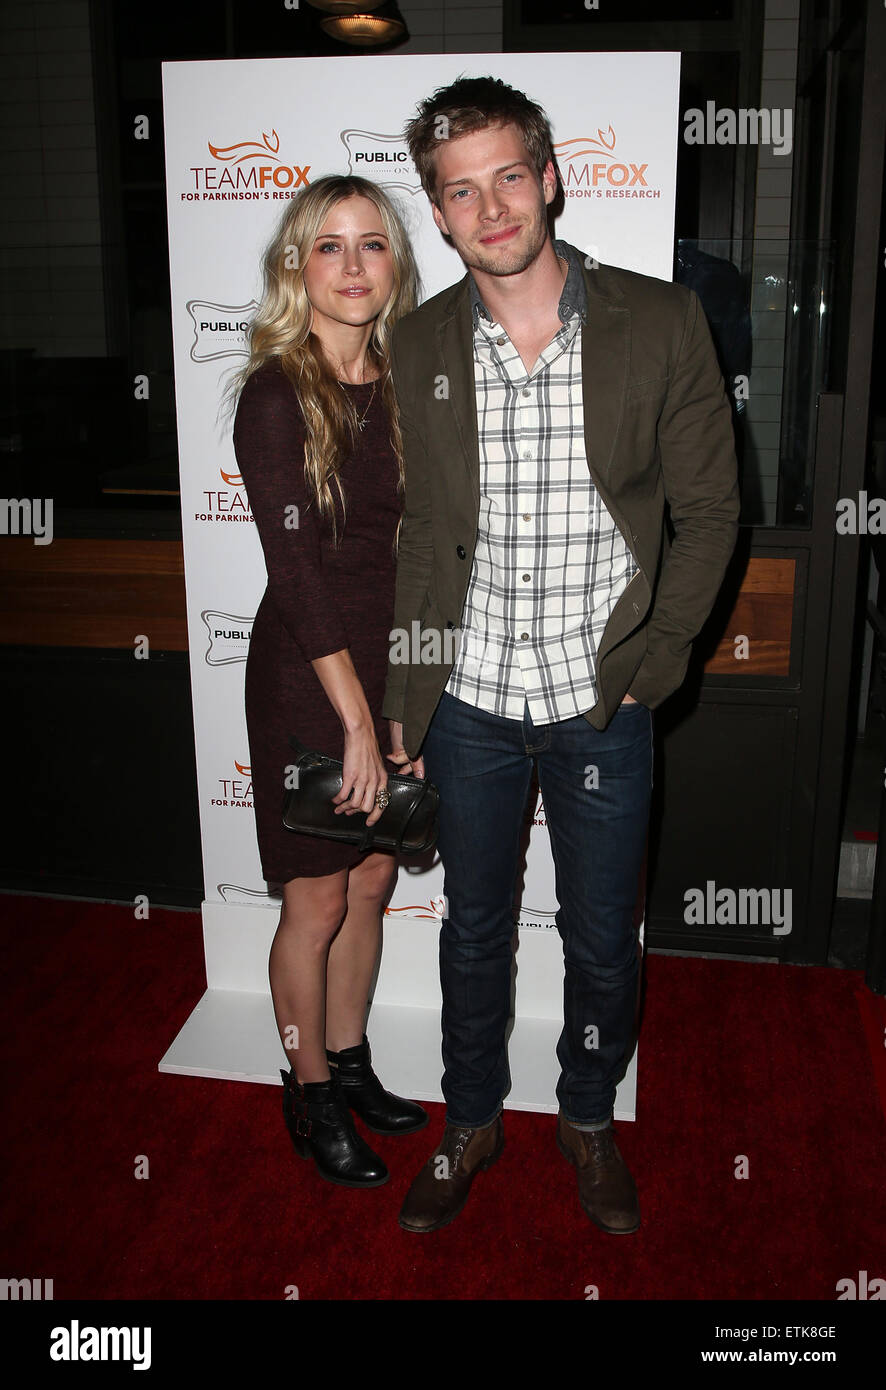 Raising The Bar To End Parkinson's Featuring: Hunter Parrish, Kathryn ...